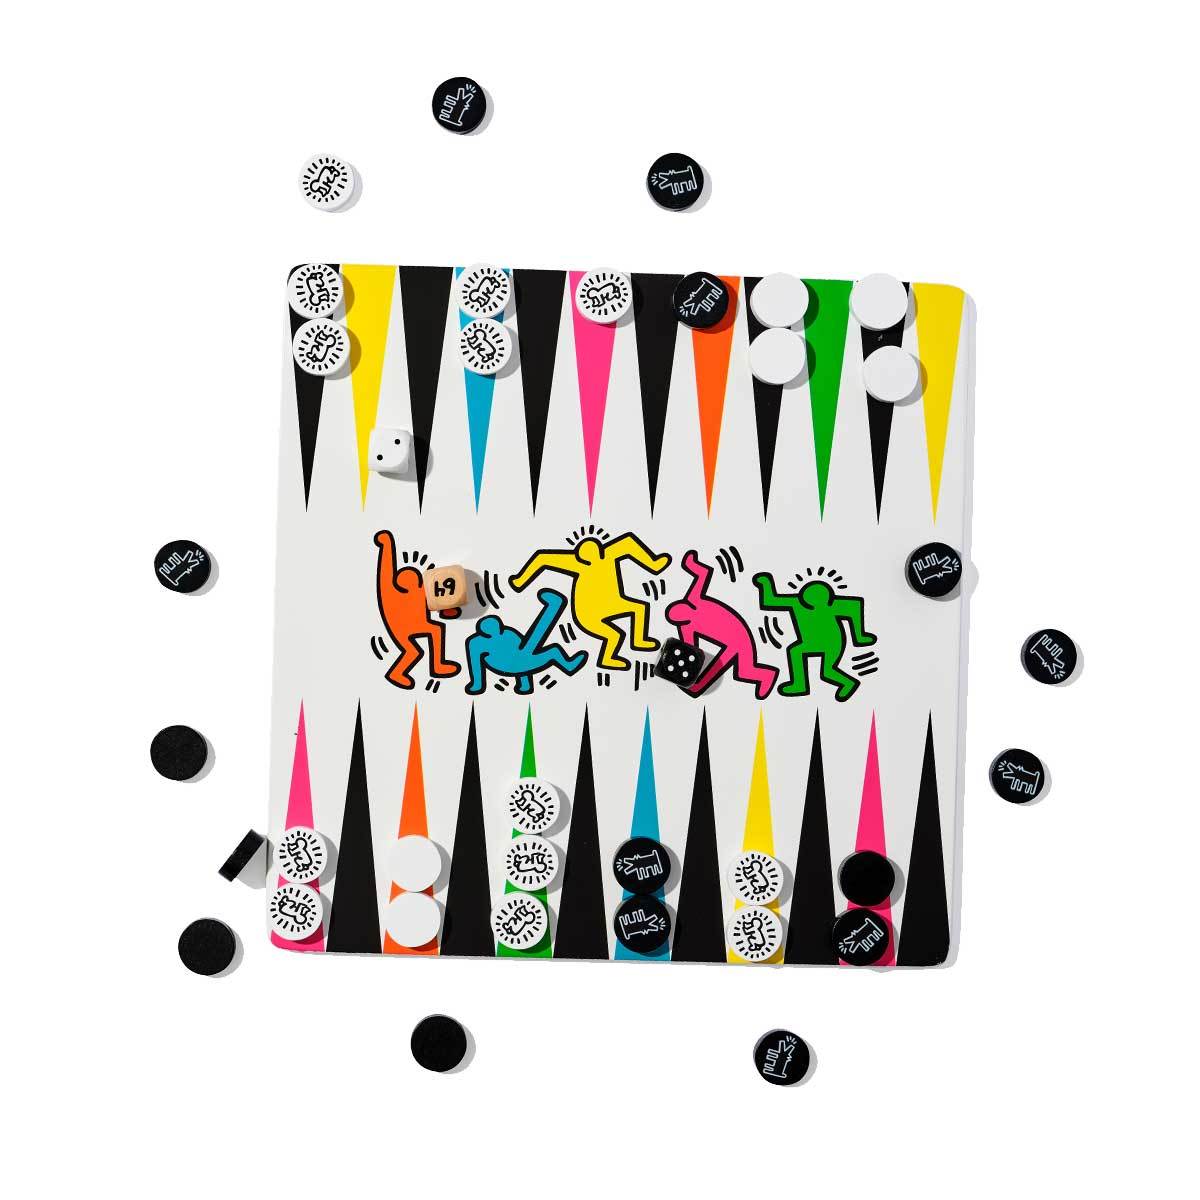 Keith Haring 2 in 1 Backgammon & Draughts